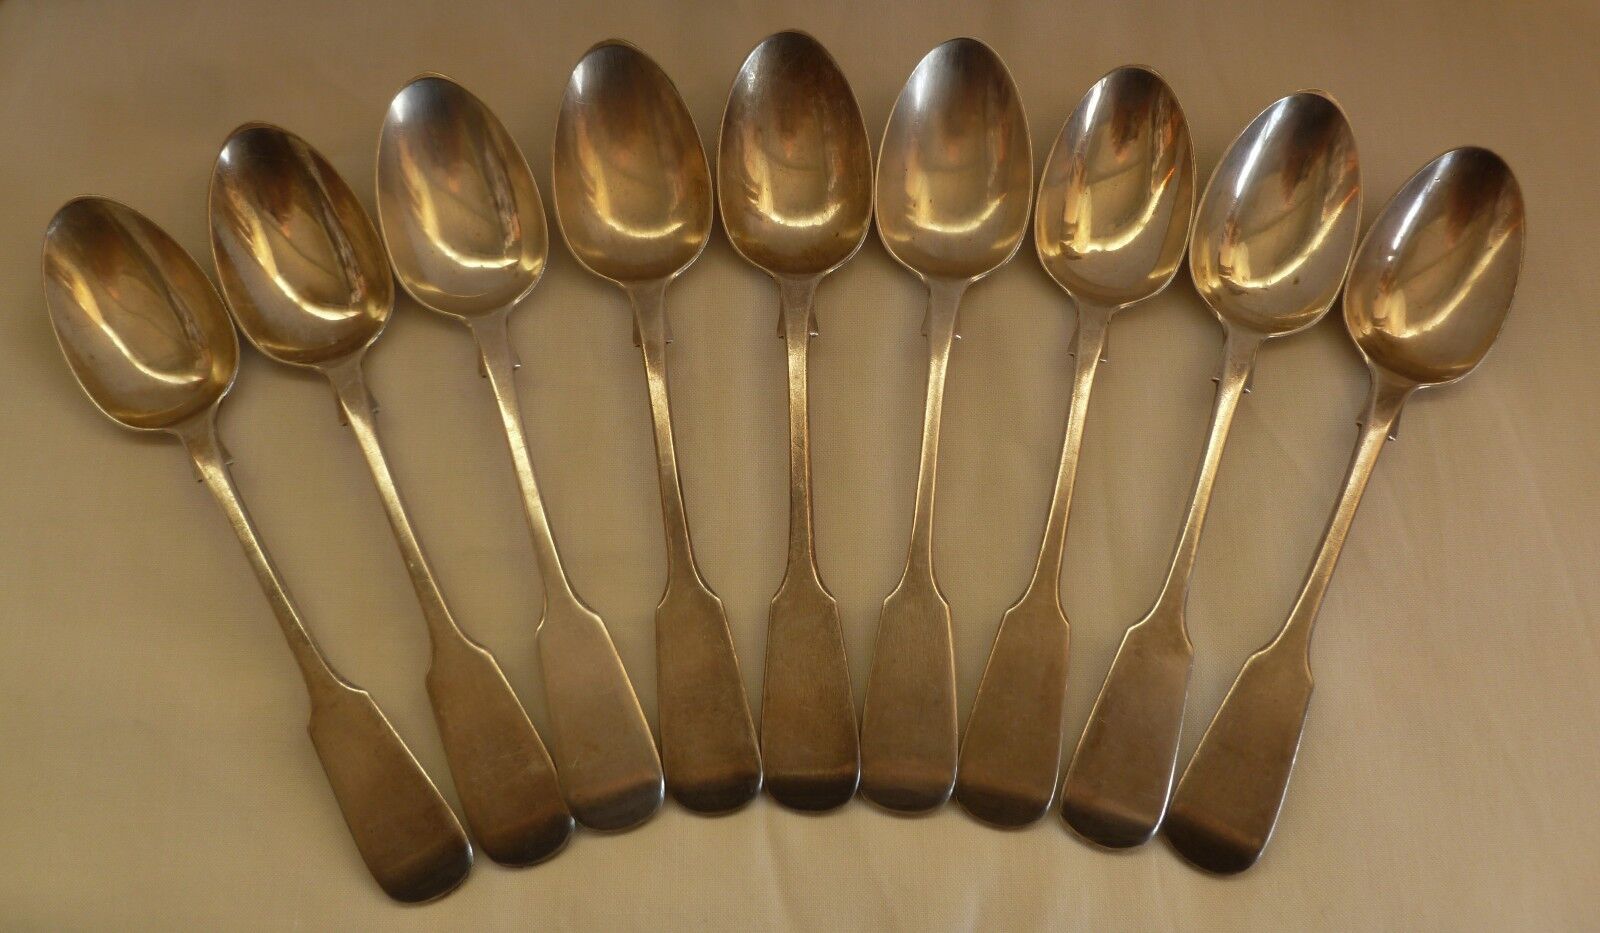 LONDON 1854 - SET OF 9 STERLING SILVER SPOONS BY CHAWNER & Co - GEORGE W ADAMS